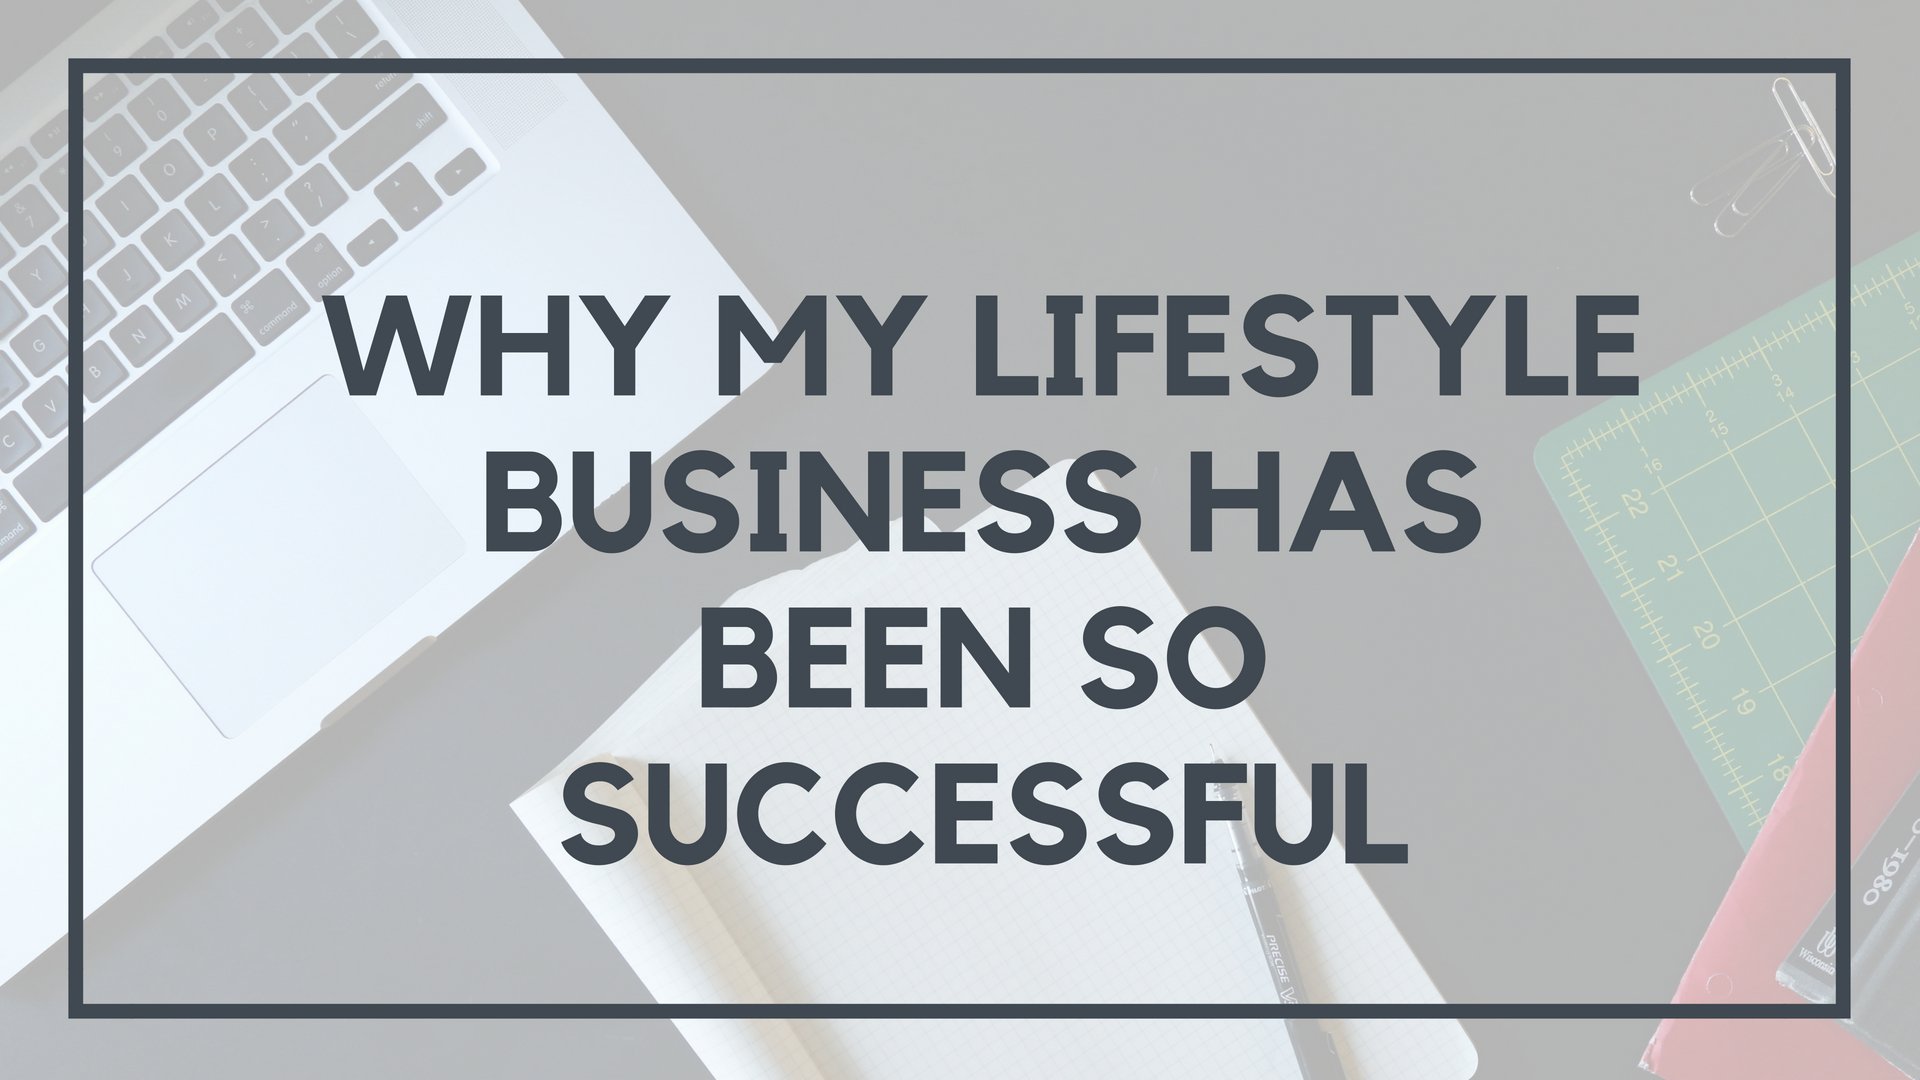 Why My Lifestyle Business Has Been So Successful